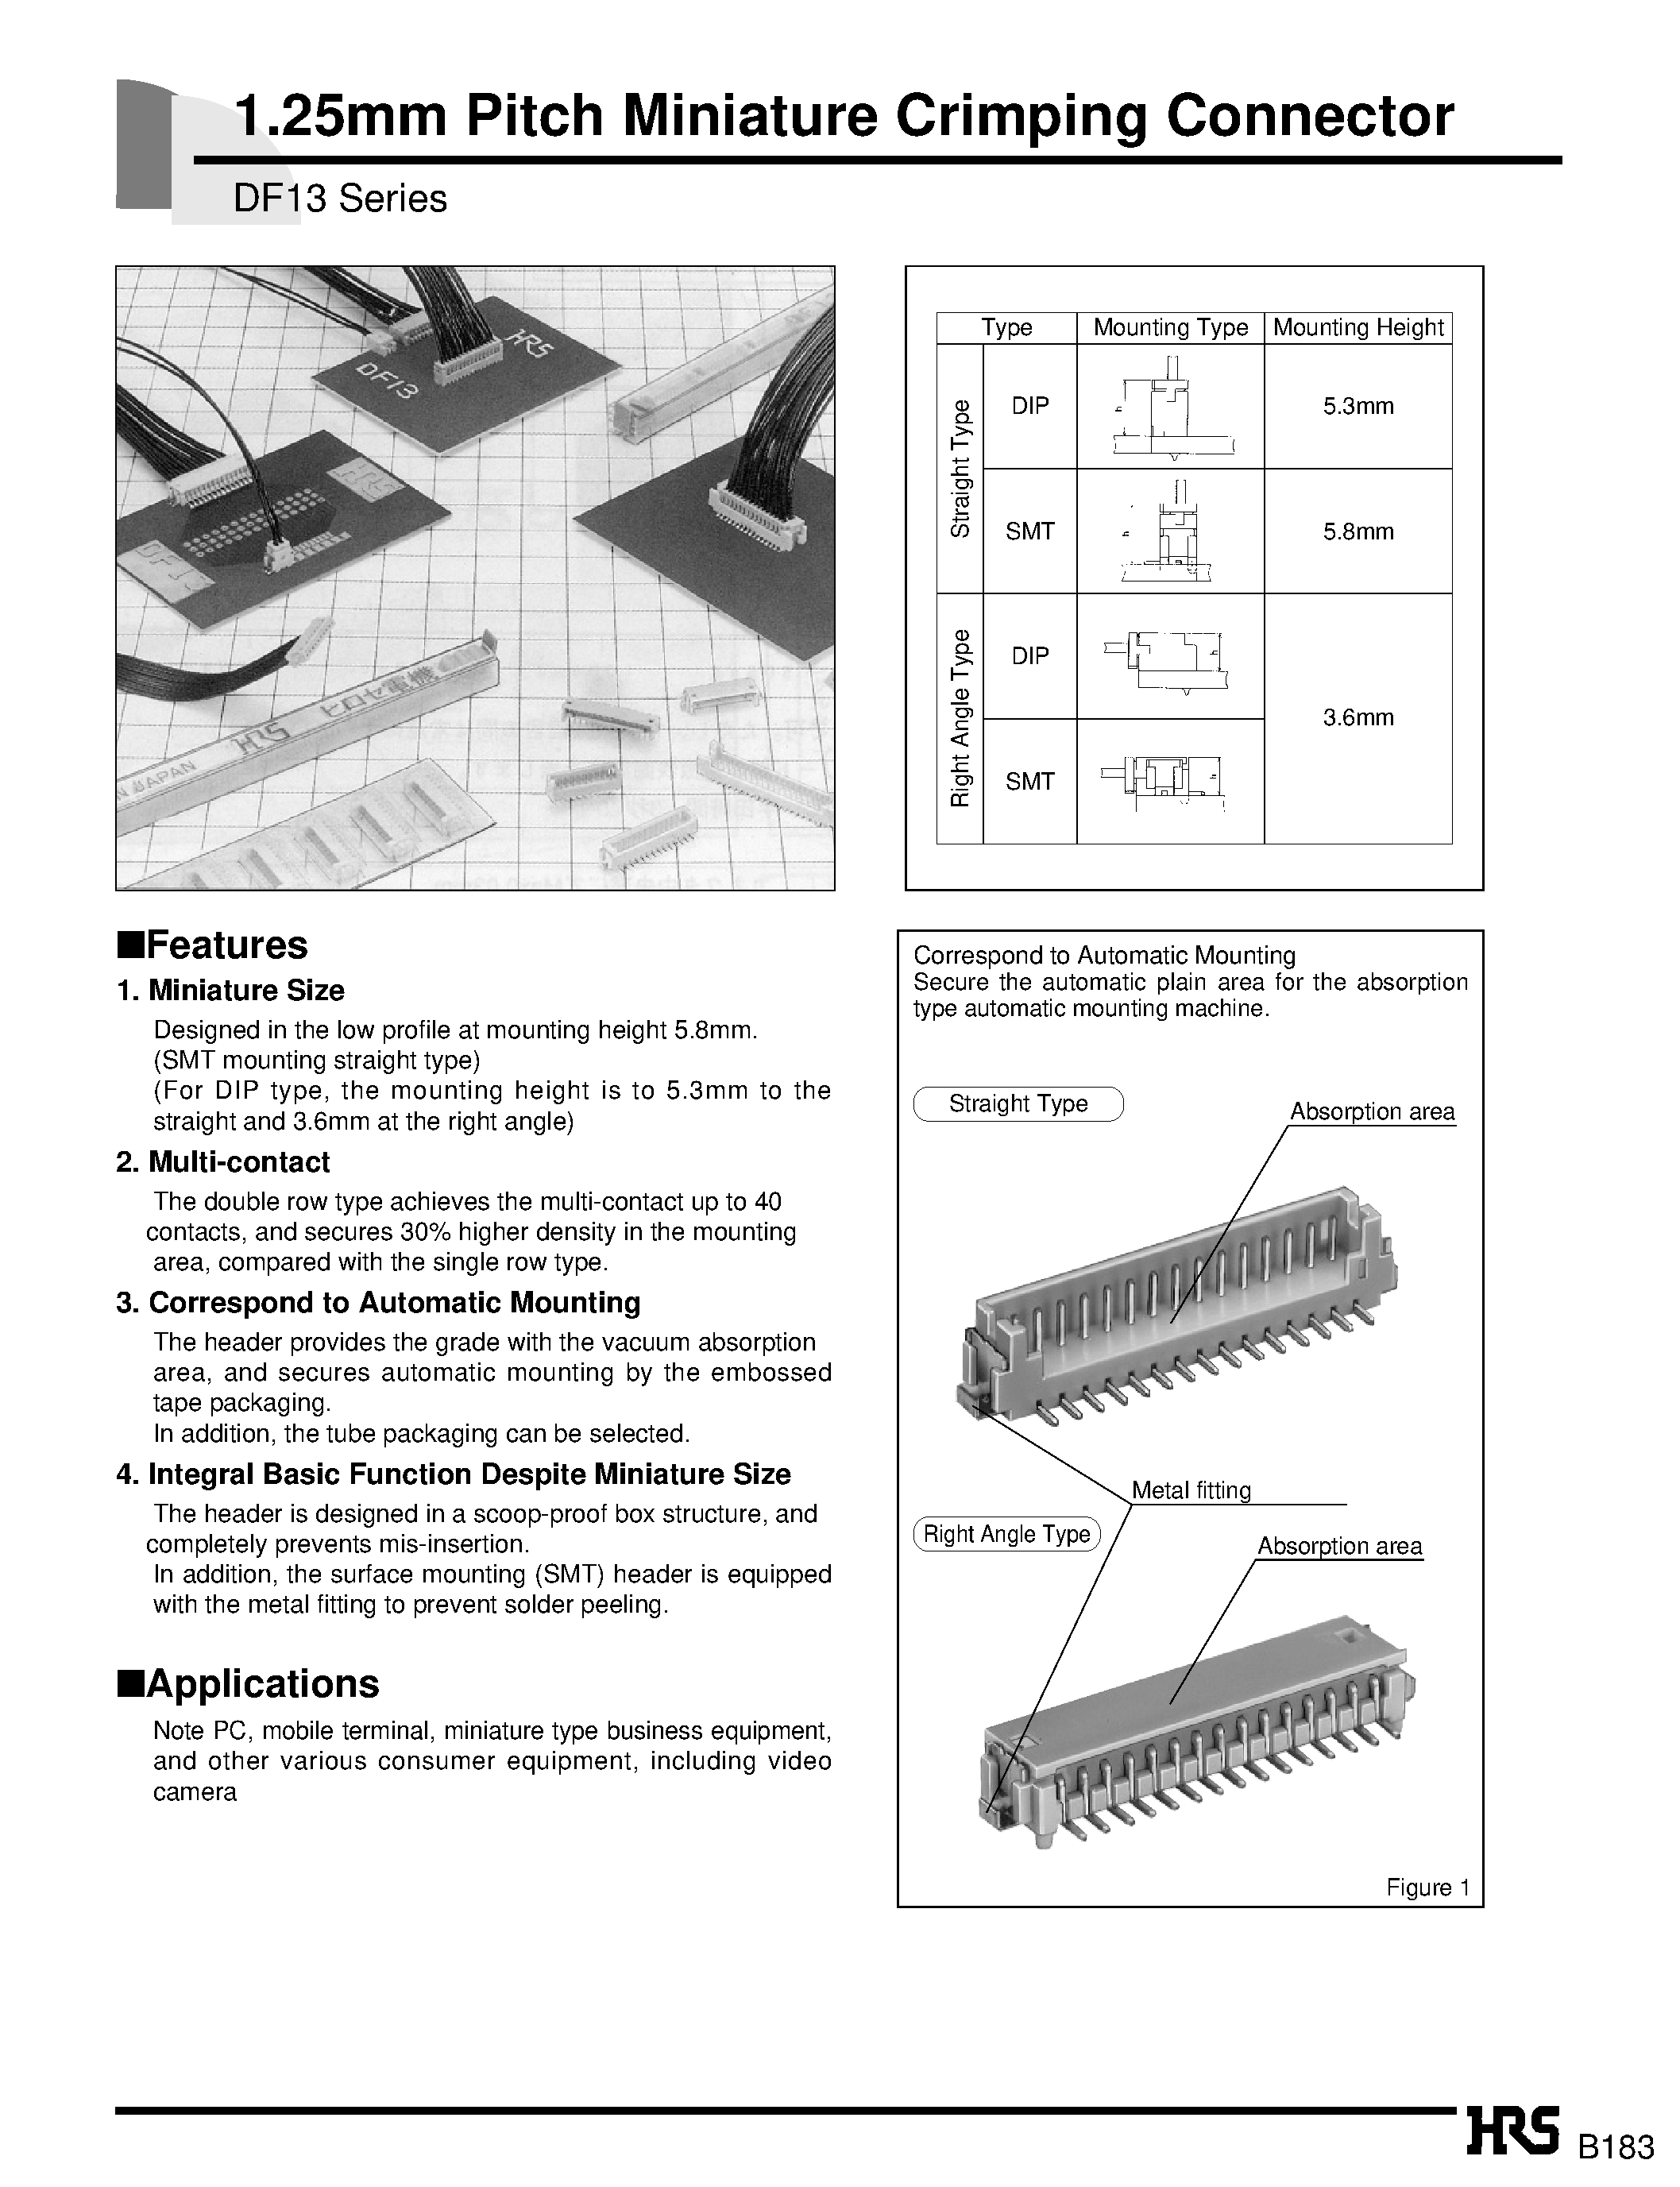 Datasheet DF13-12S-1.25H - 1.25mm Pitch Miniature Crimping Connector page 1